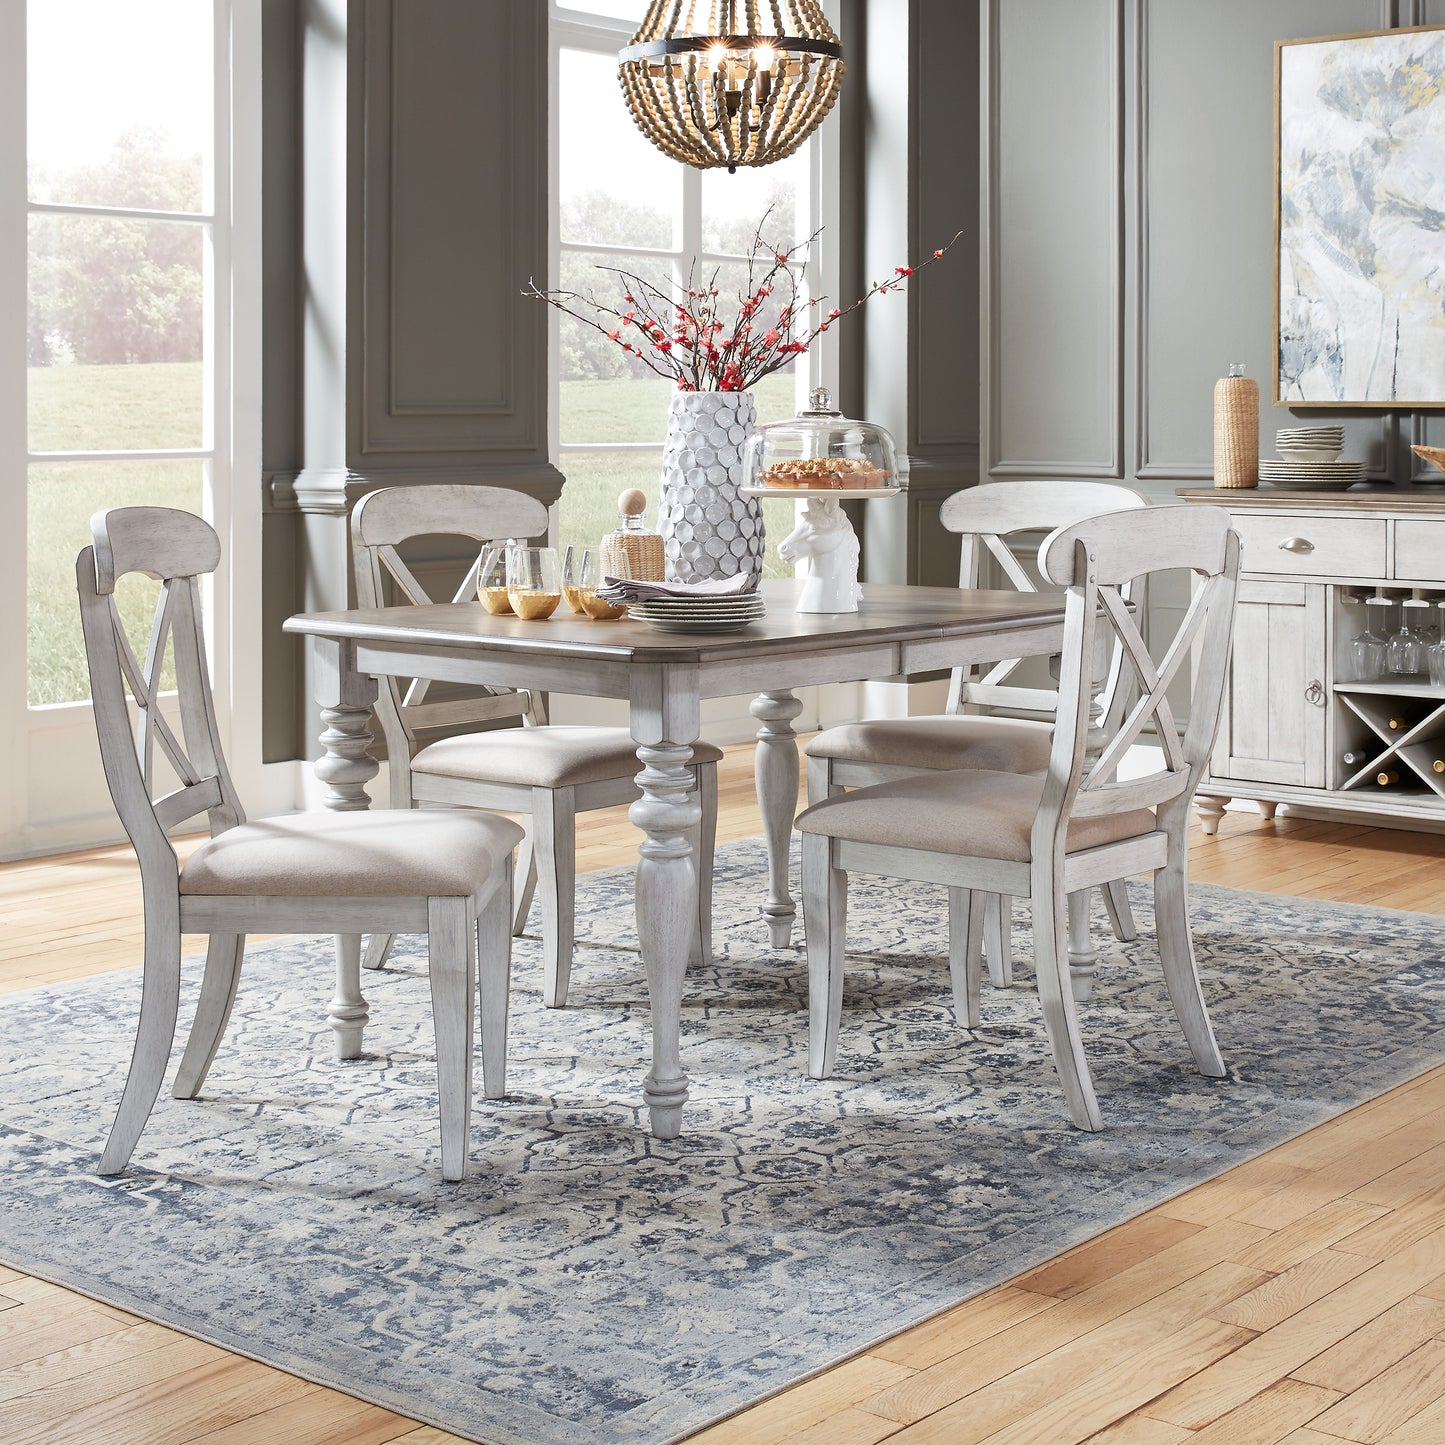 Chandria Dining Set - Extendable Rectangular Table with 4 Chairs in Antique White and Weathered Pine Finish